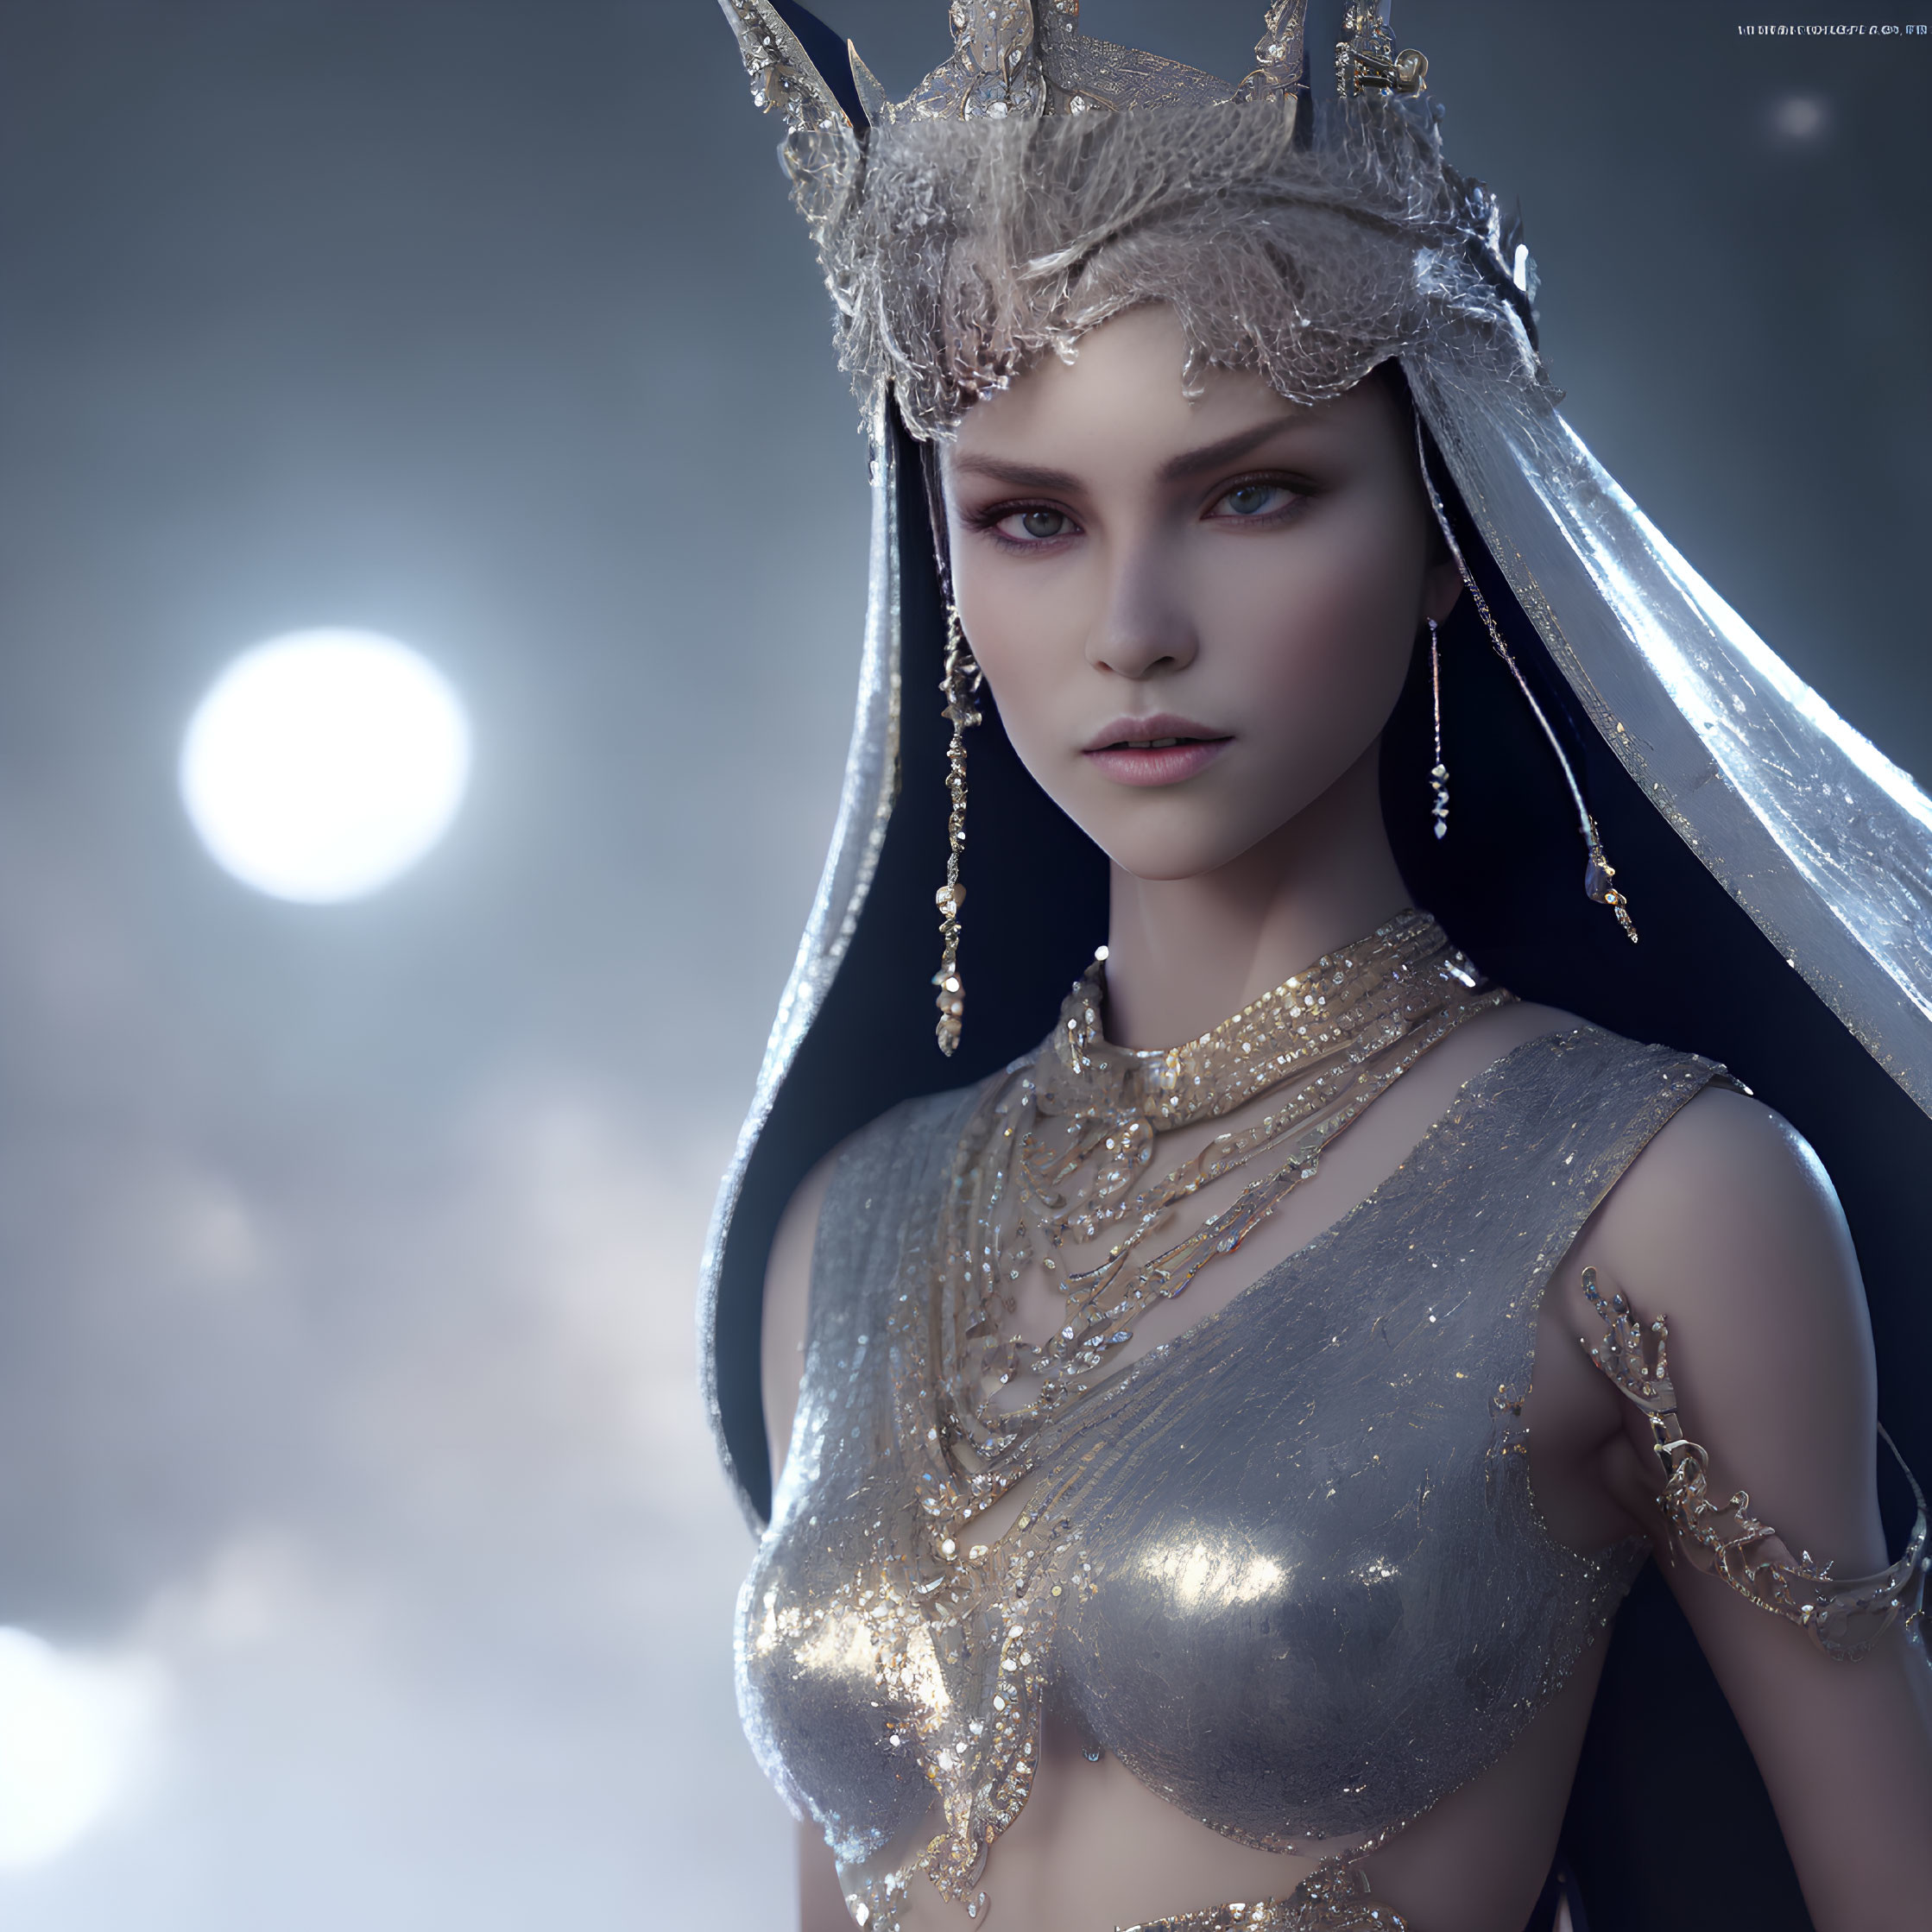 Mystical woman with pointy ears in silver crown under luminous moon